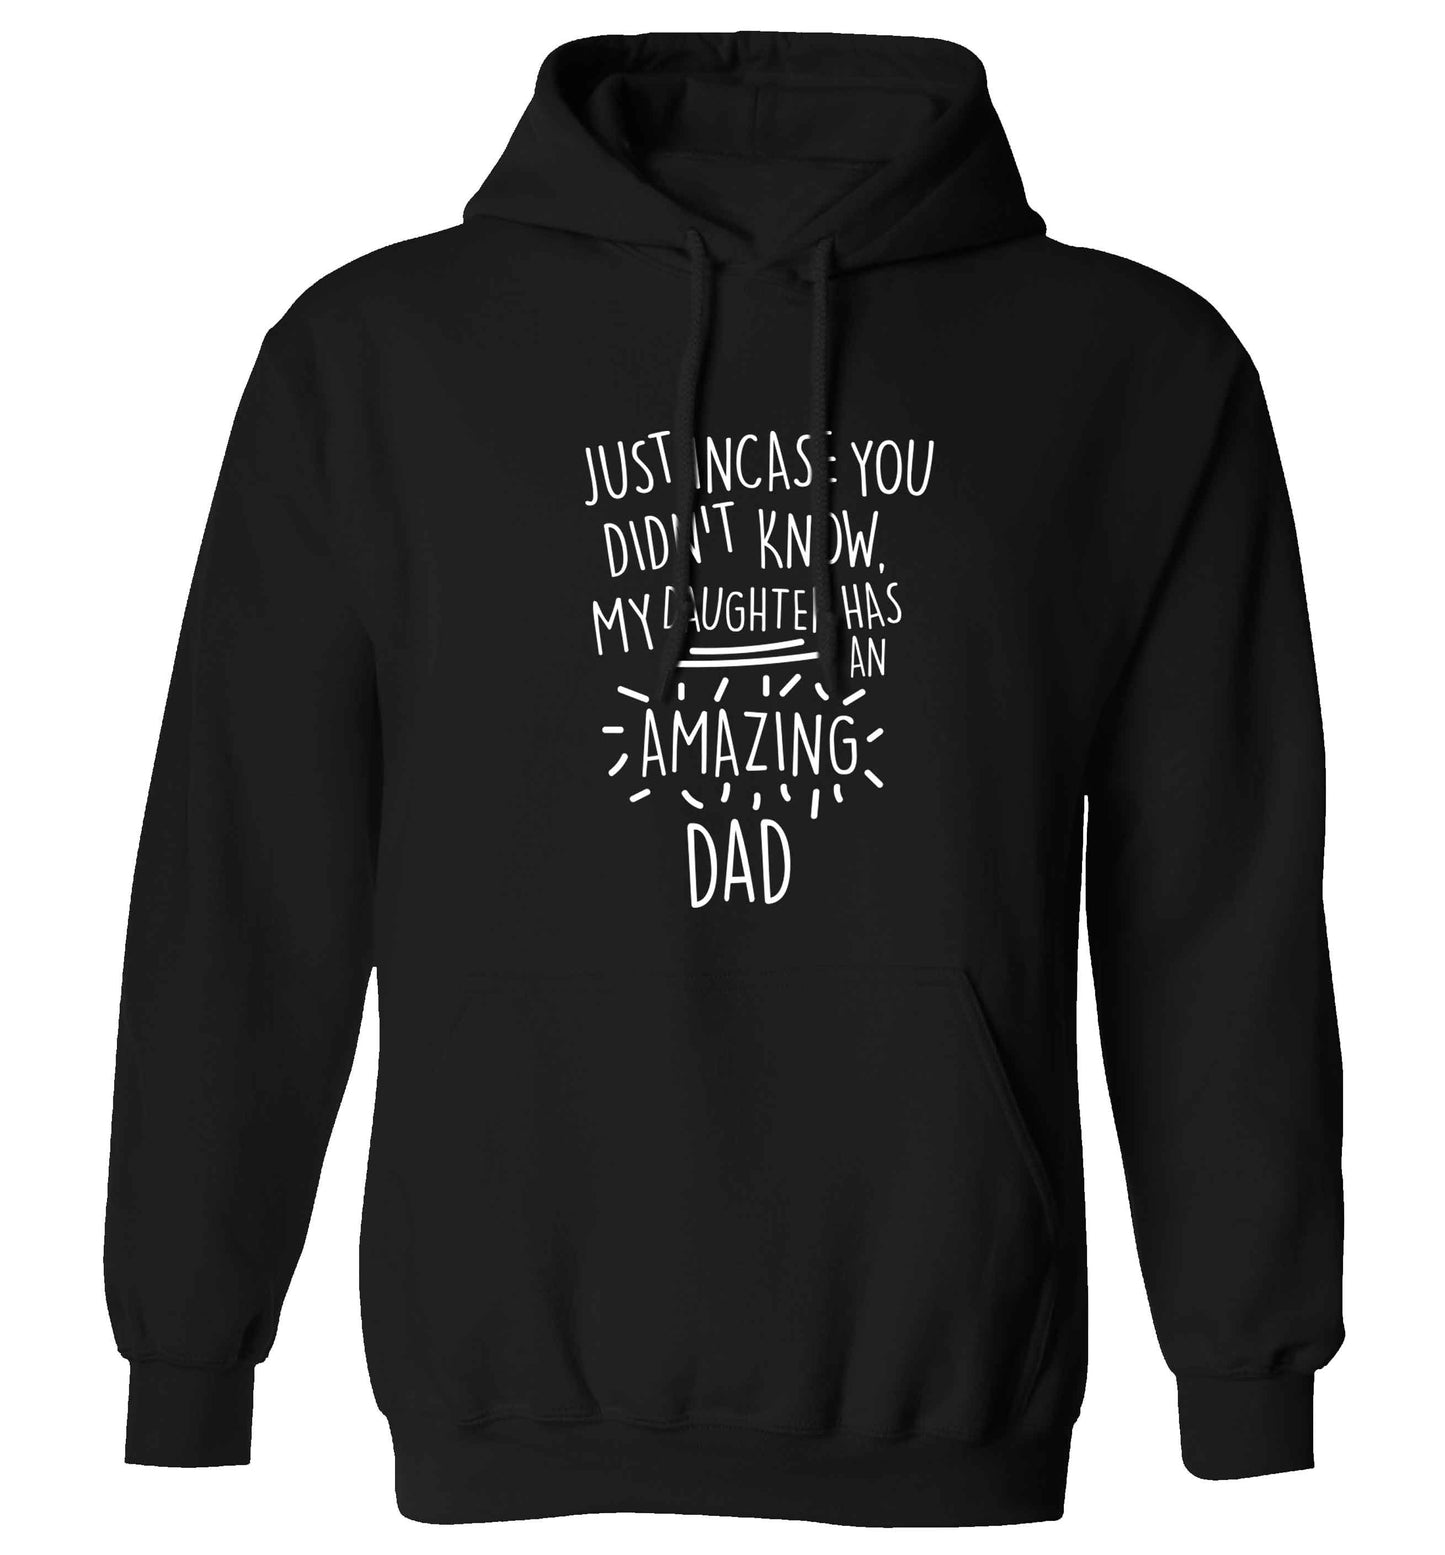 Just incase you didn't know my daughter has an amazing dad adults unisex black hoodie 2XL